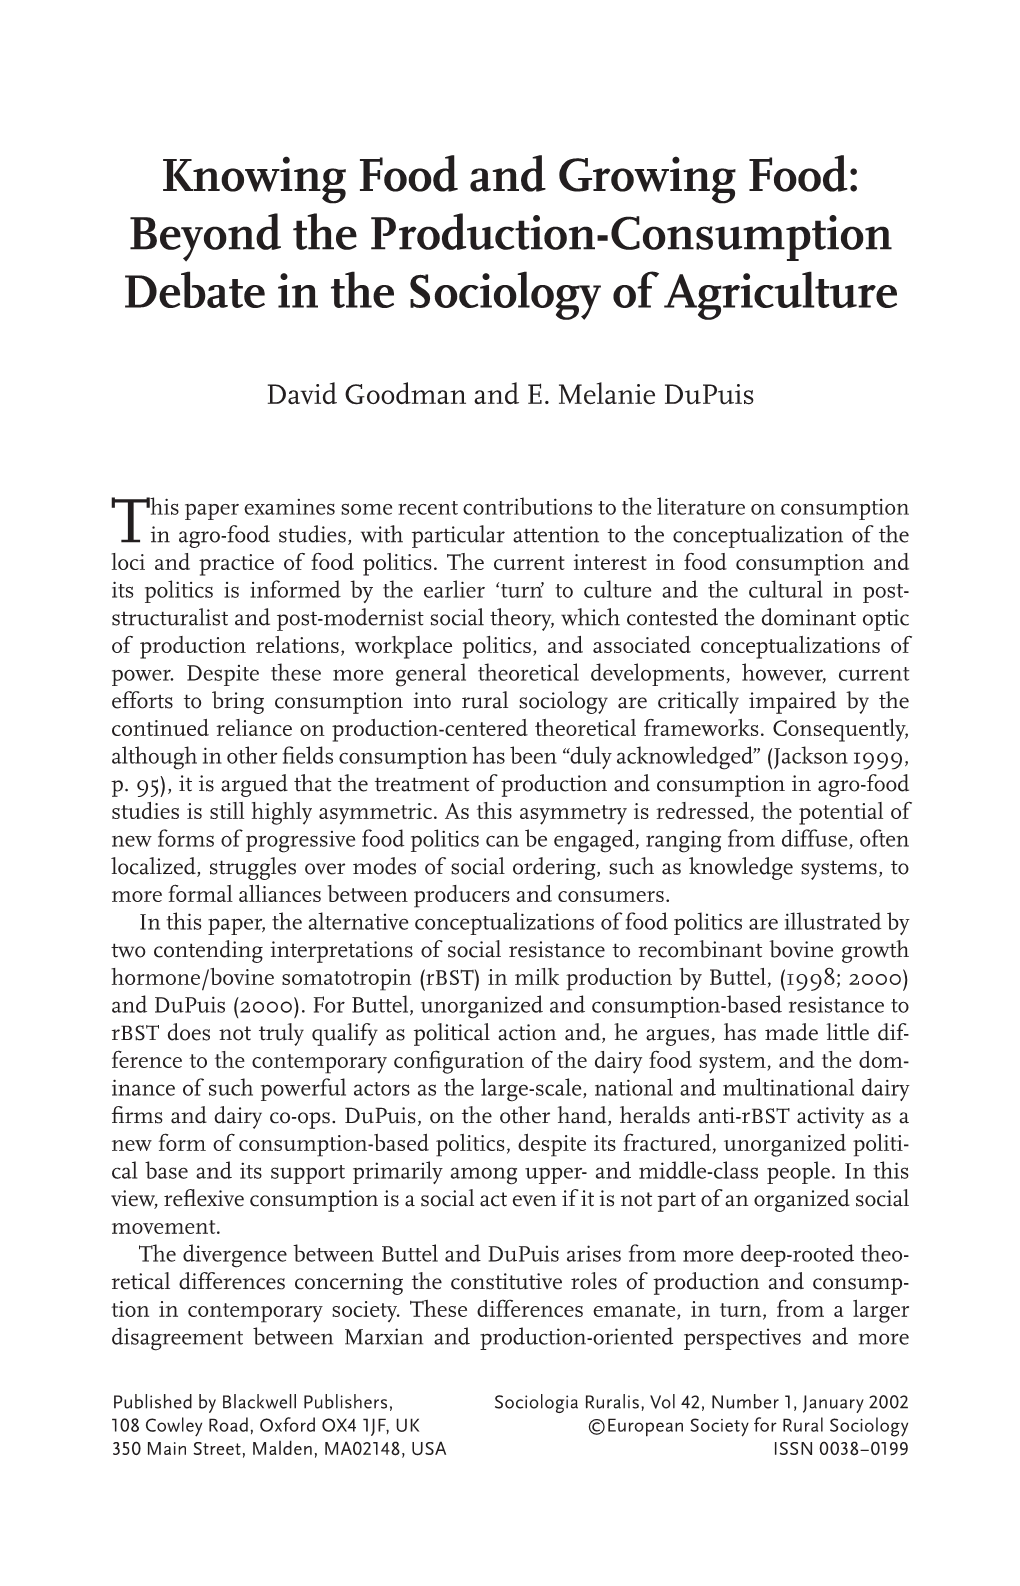 Beyond the Production–Consumption Debate in the Sociology of Agriculture